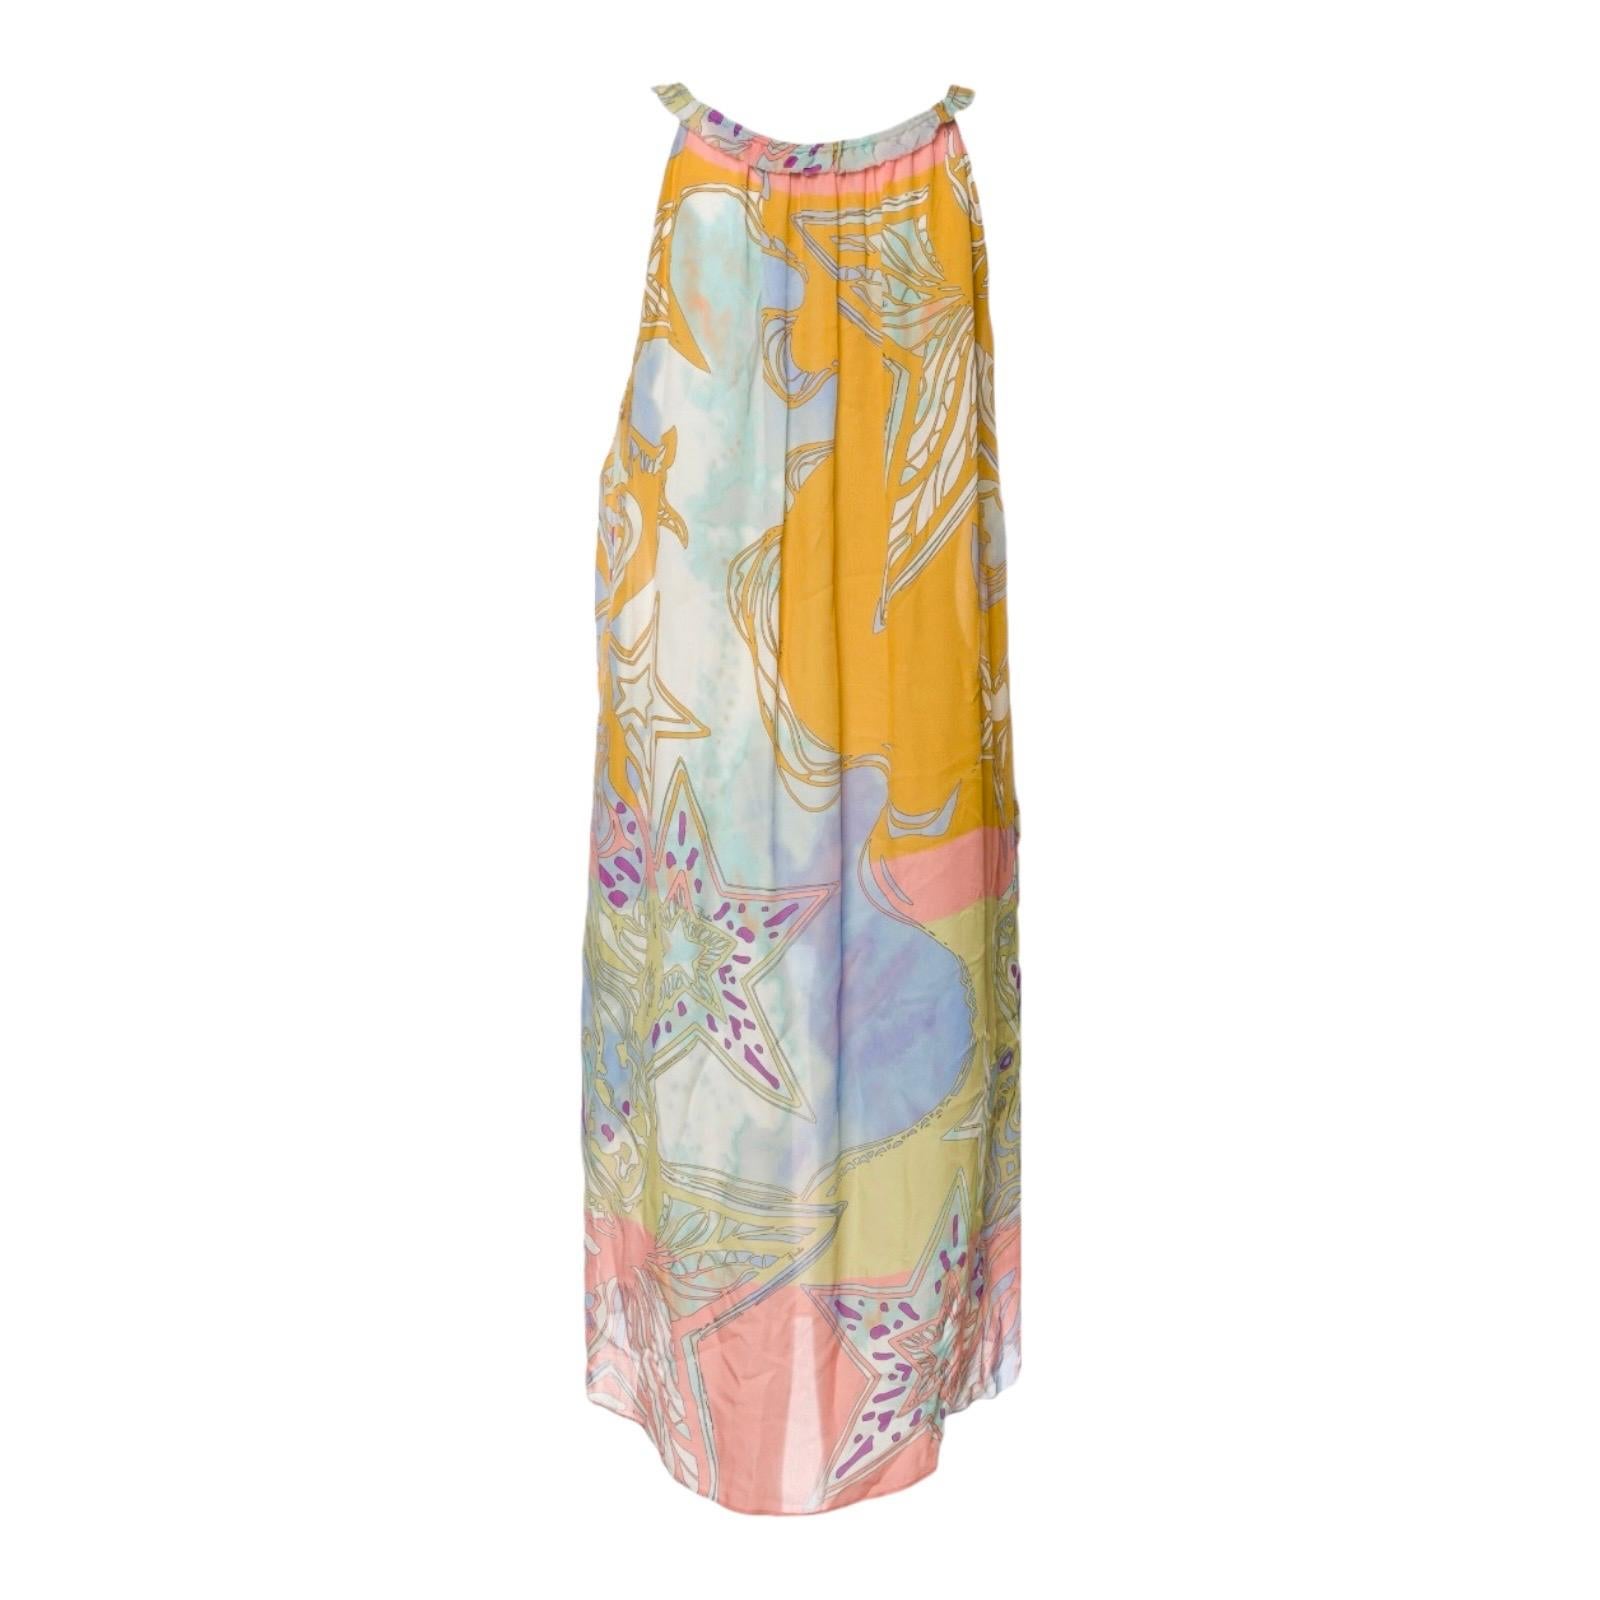 EMILIO PUCCI PASTEL SIGNATURE PRINT DRESS

A timeless EMILIO PUCCI gown that will never go out of style!


Stunning multicolored silk dress designed by Peter Dundas for Emilio Pucci.

Crafted from silk-chiffon, it's drenched in gorgeous shades of